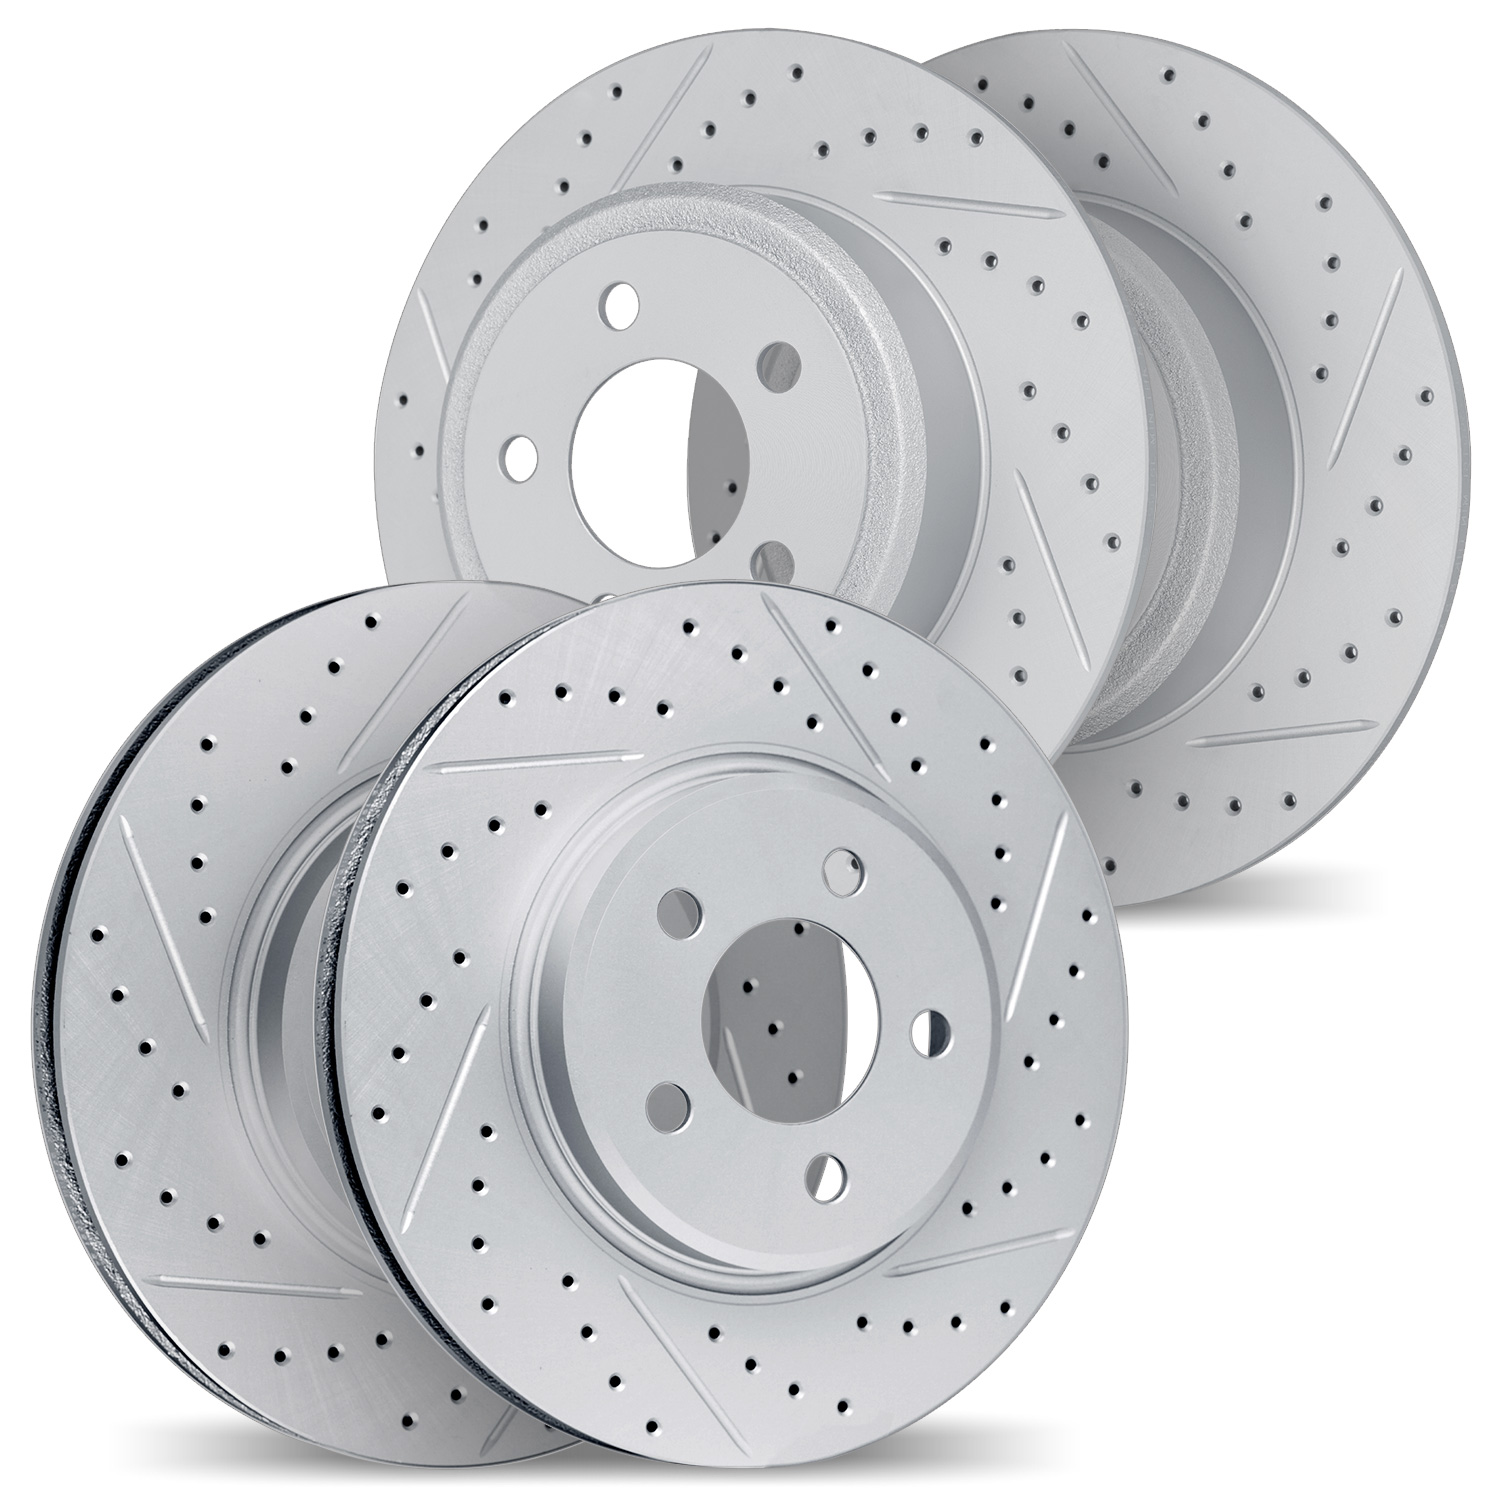 2004-13038 Geoperformance Drilled/Slotted Brake Rotors, 2005-2005 Subaru, Position: Front and Rear